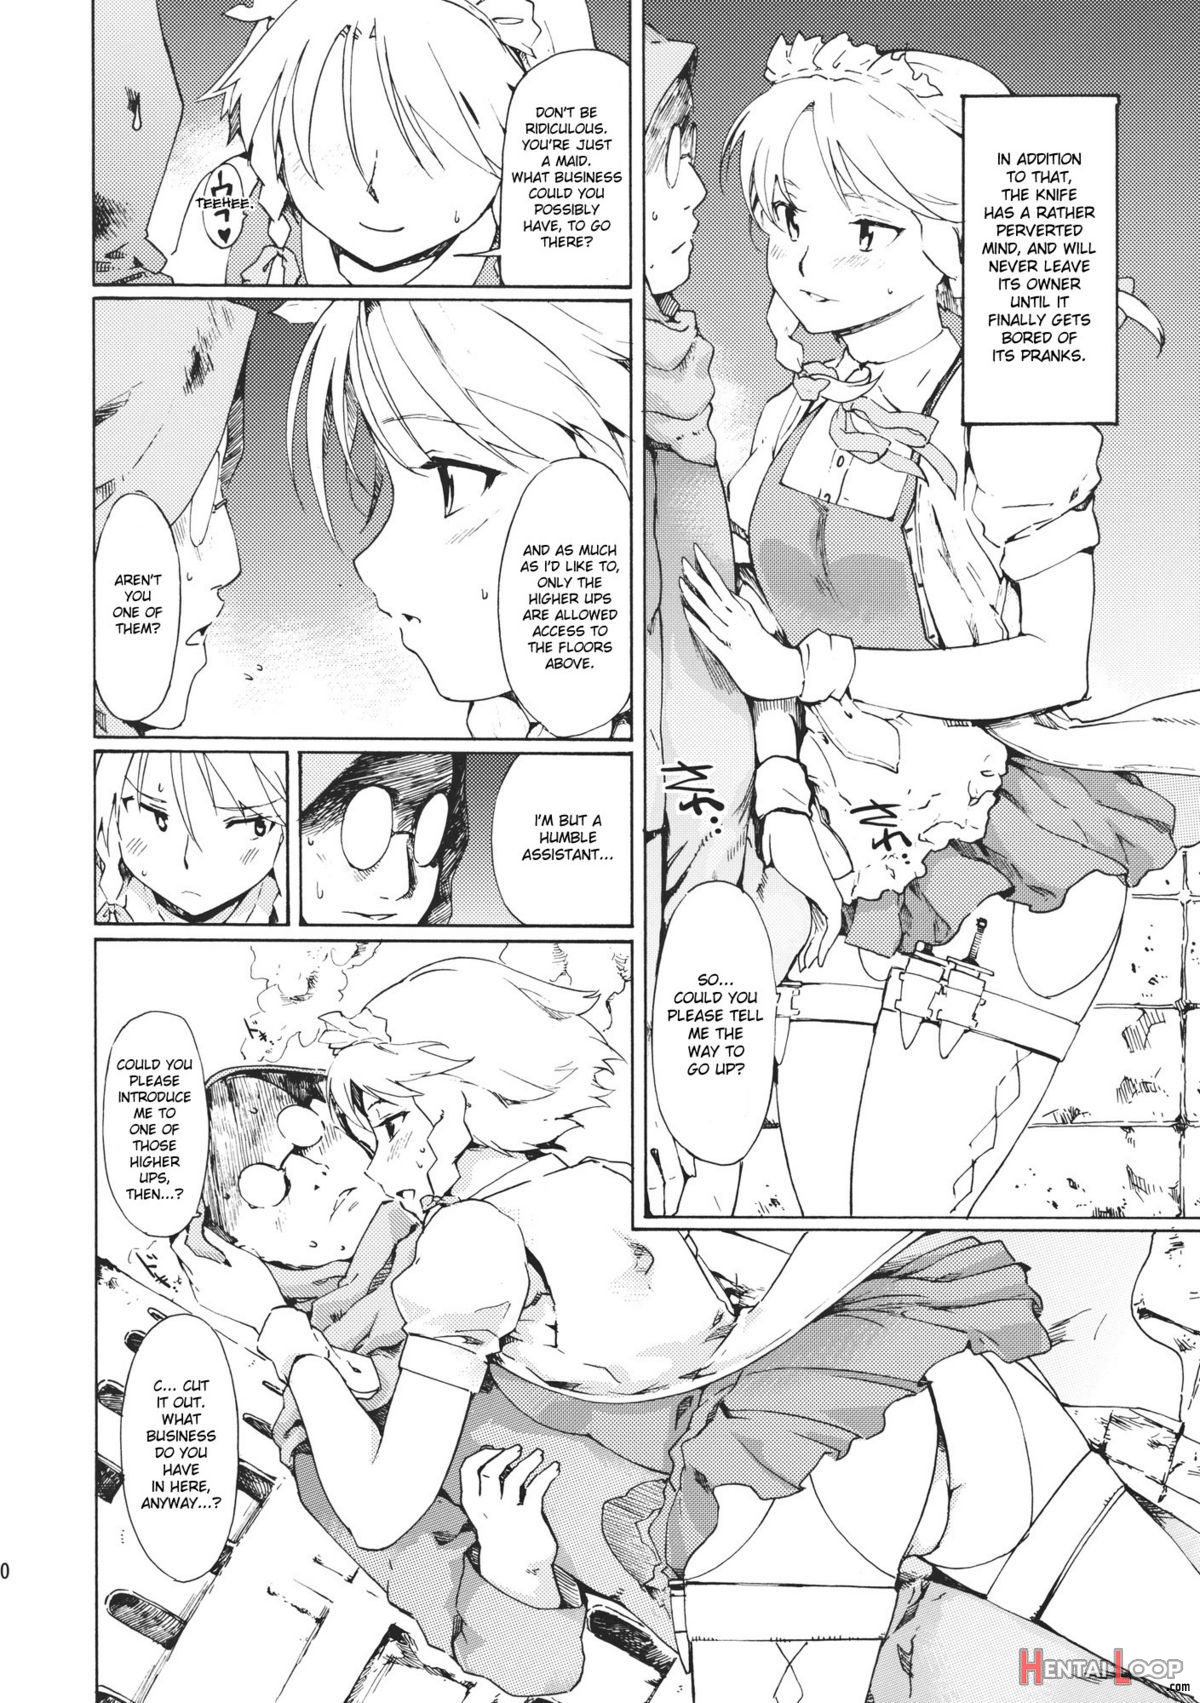 Ukyoe-kan Smiling Knife Expansion page 10